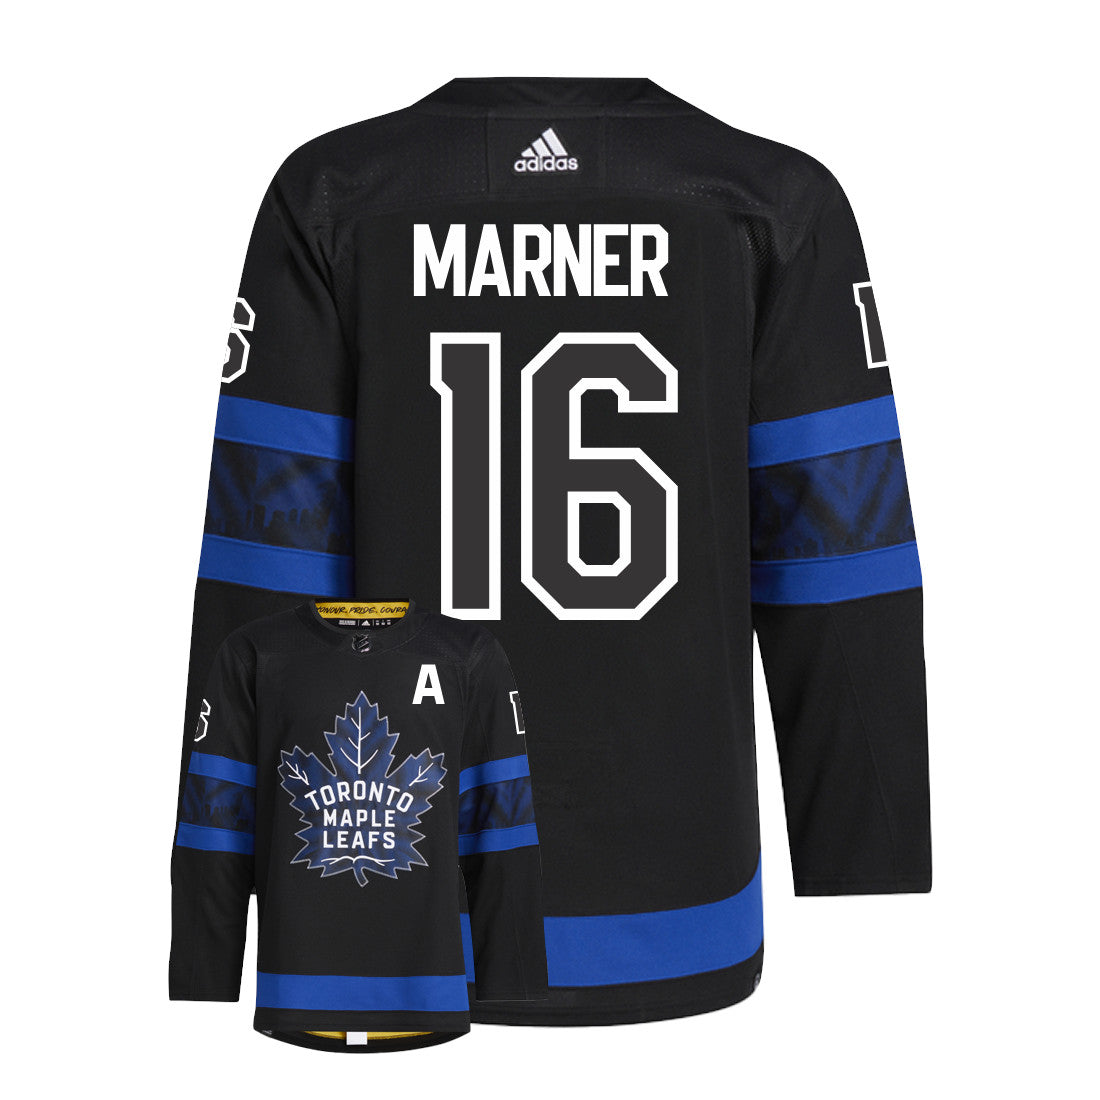 Mitch Marner Toronto Maple Leafs Adidas Primegreen Authentic Third Alternate NHL Hockey Jersey - Back/Front View